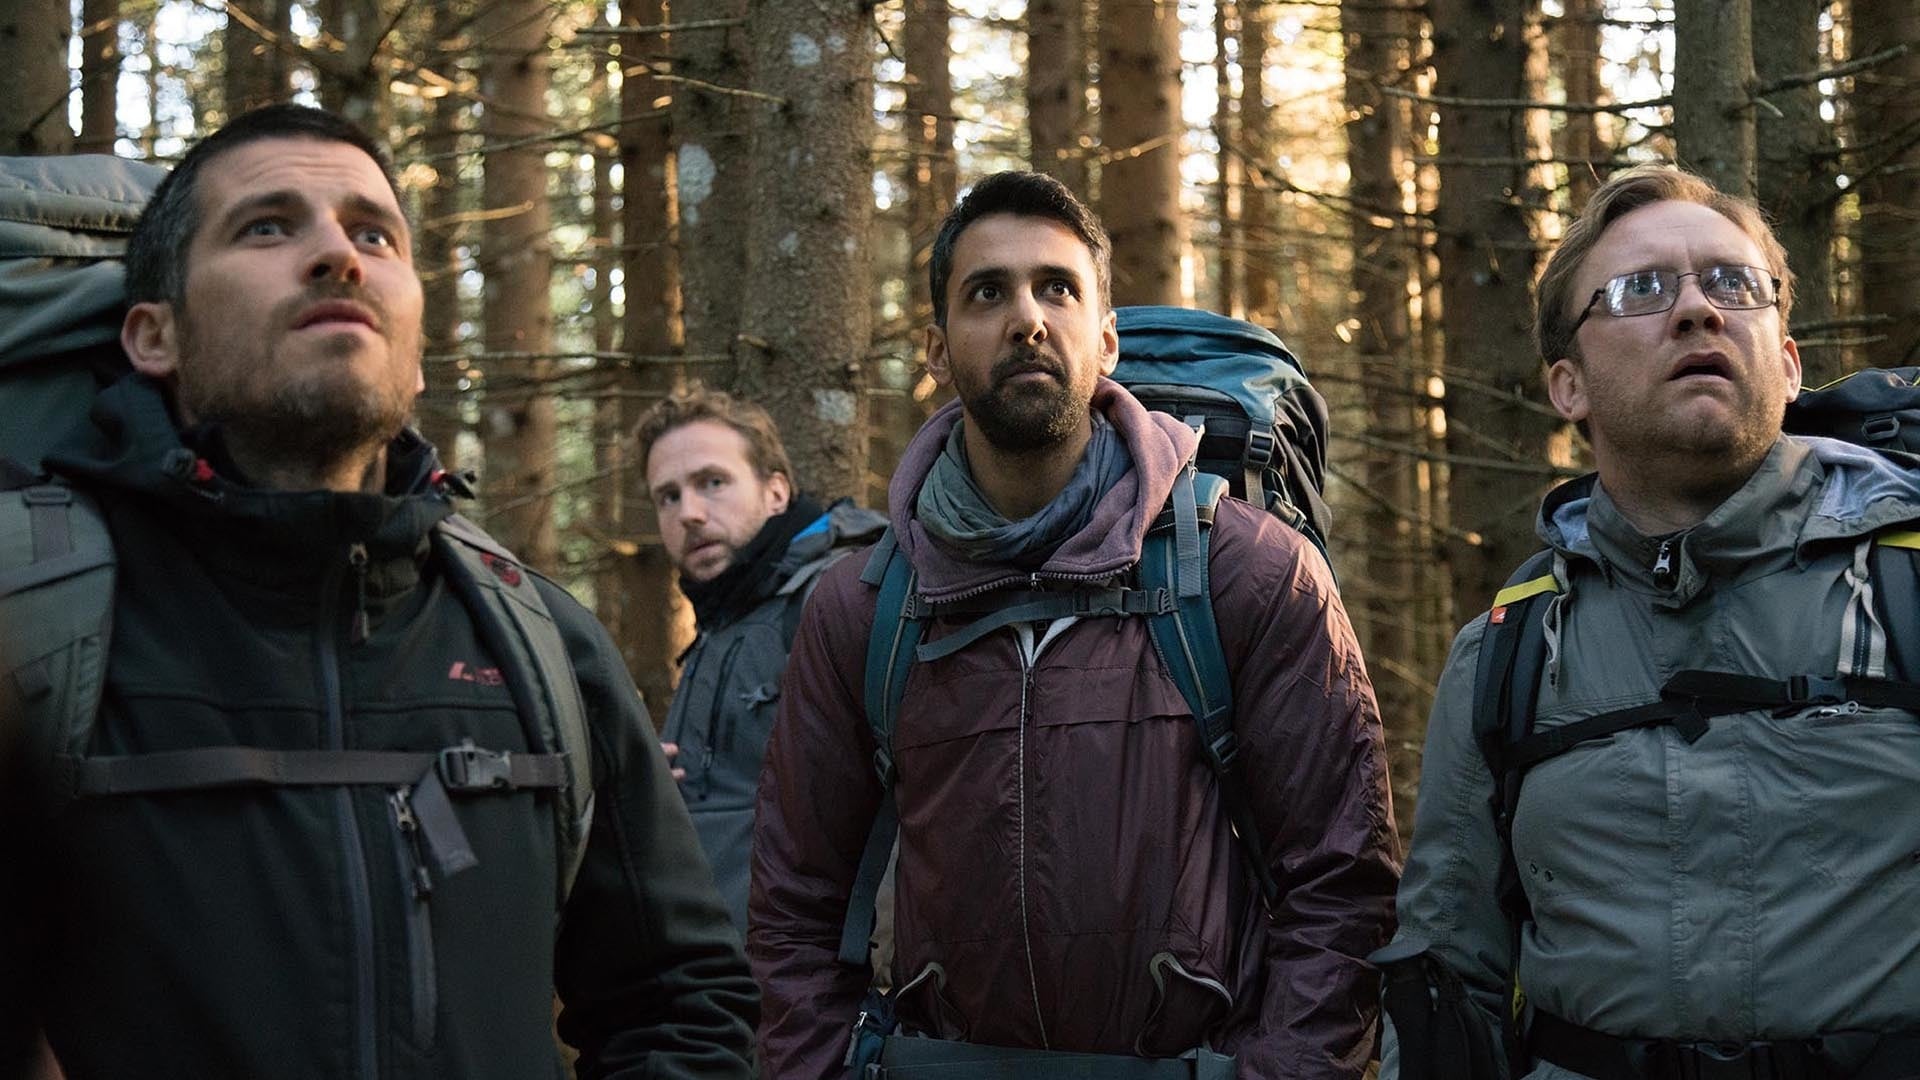 Screenshot from the film The Ritual. Four men look concerned surrounded by trees in the woods.